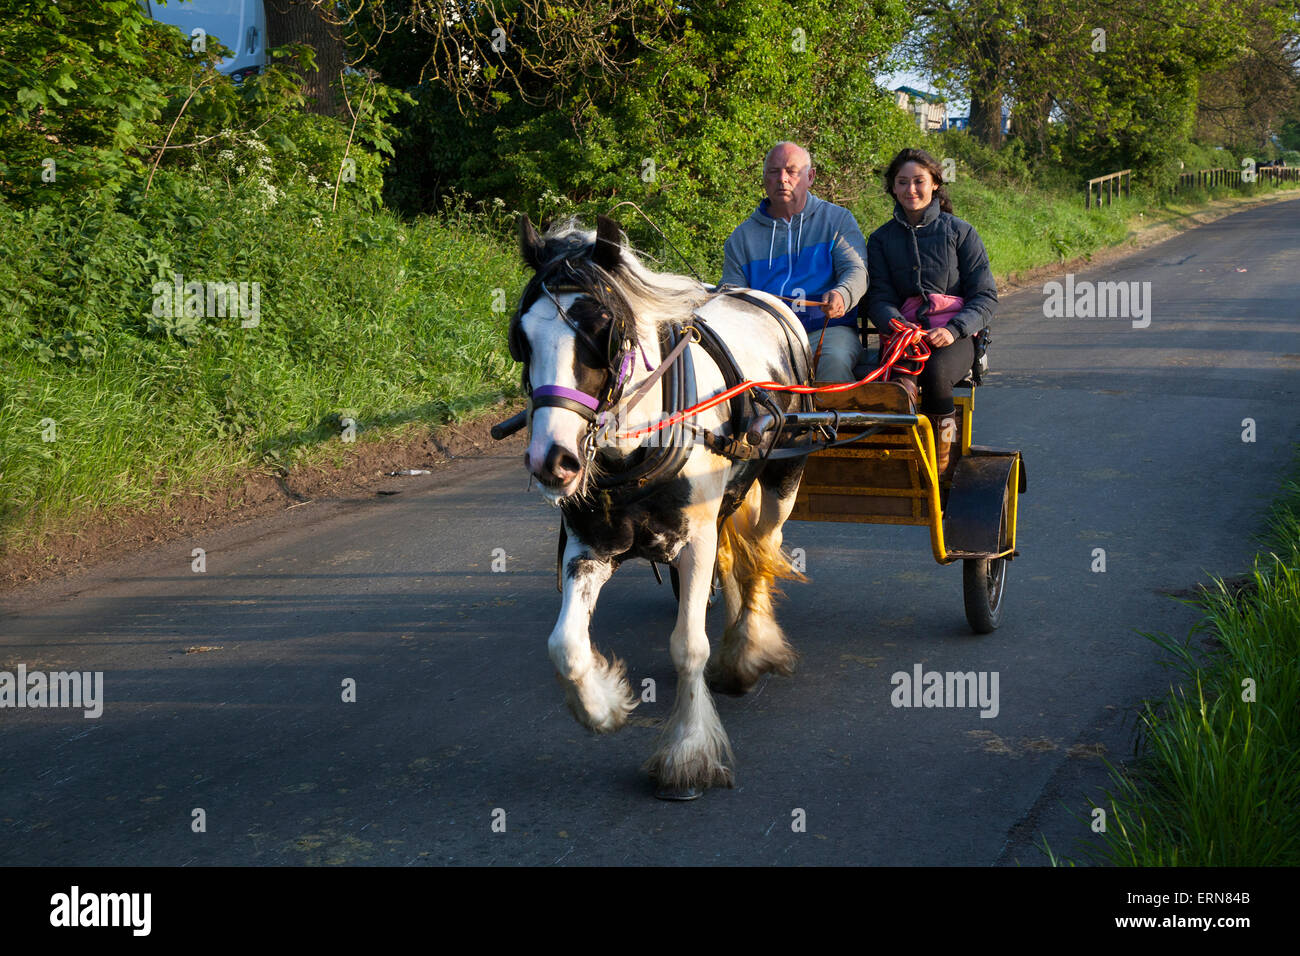 Appleby, Cumbria, Uk. 5th June, 2015.  Early morning horse carriage ride at the Appleby Horse Fair in Cumbria.  The Fair is an annual gathering of Gypsies and Travellers which takes place on the first week in June, and has taken place since the reign of James II, who granted a Royal charter in 1685 allowing a horse fair 'near to the River Eden', and is the largest gathering of its kind in Europe. Stock Photo